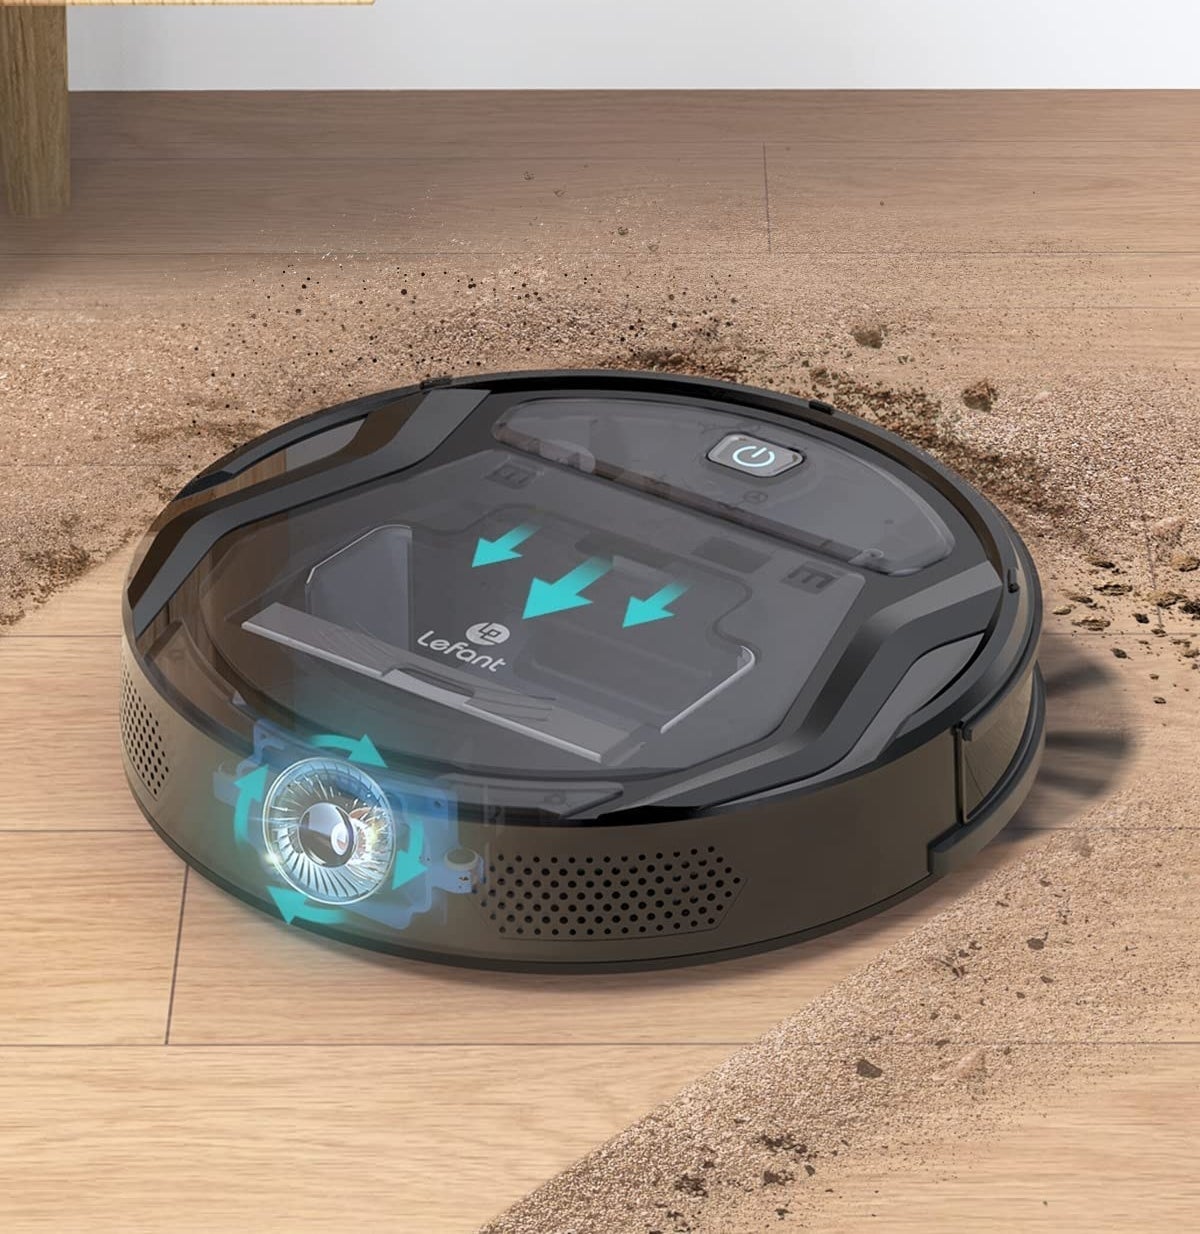 the robot mop cleaning up dirt around it